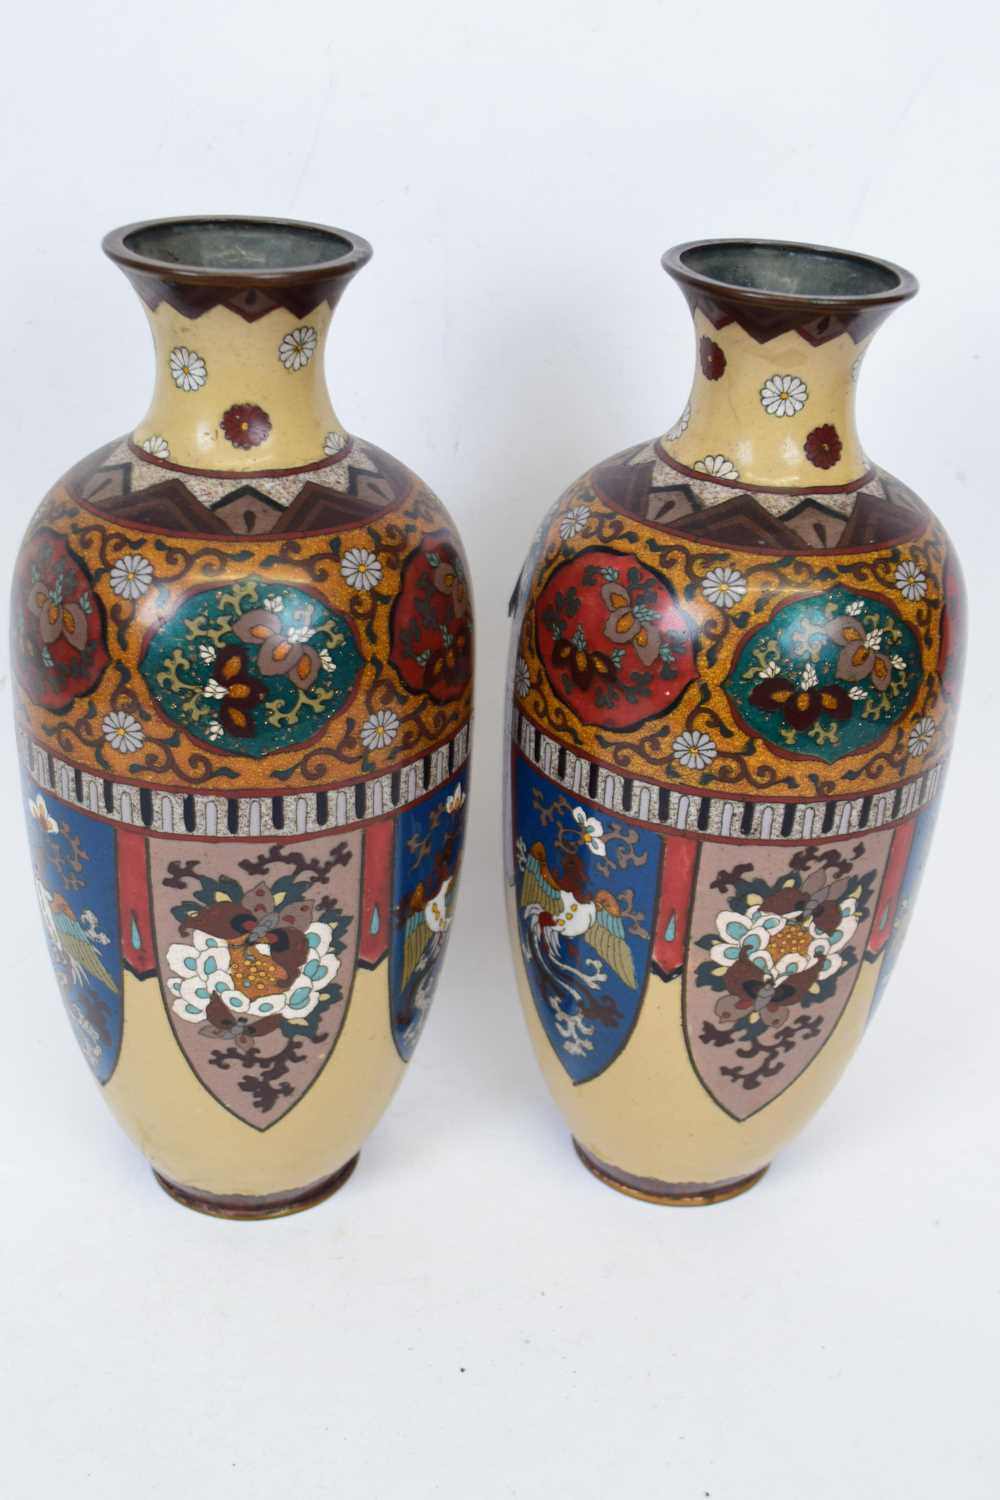 Lot 34 - Pair of cloisonne vases with geometric designs